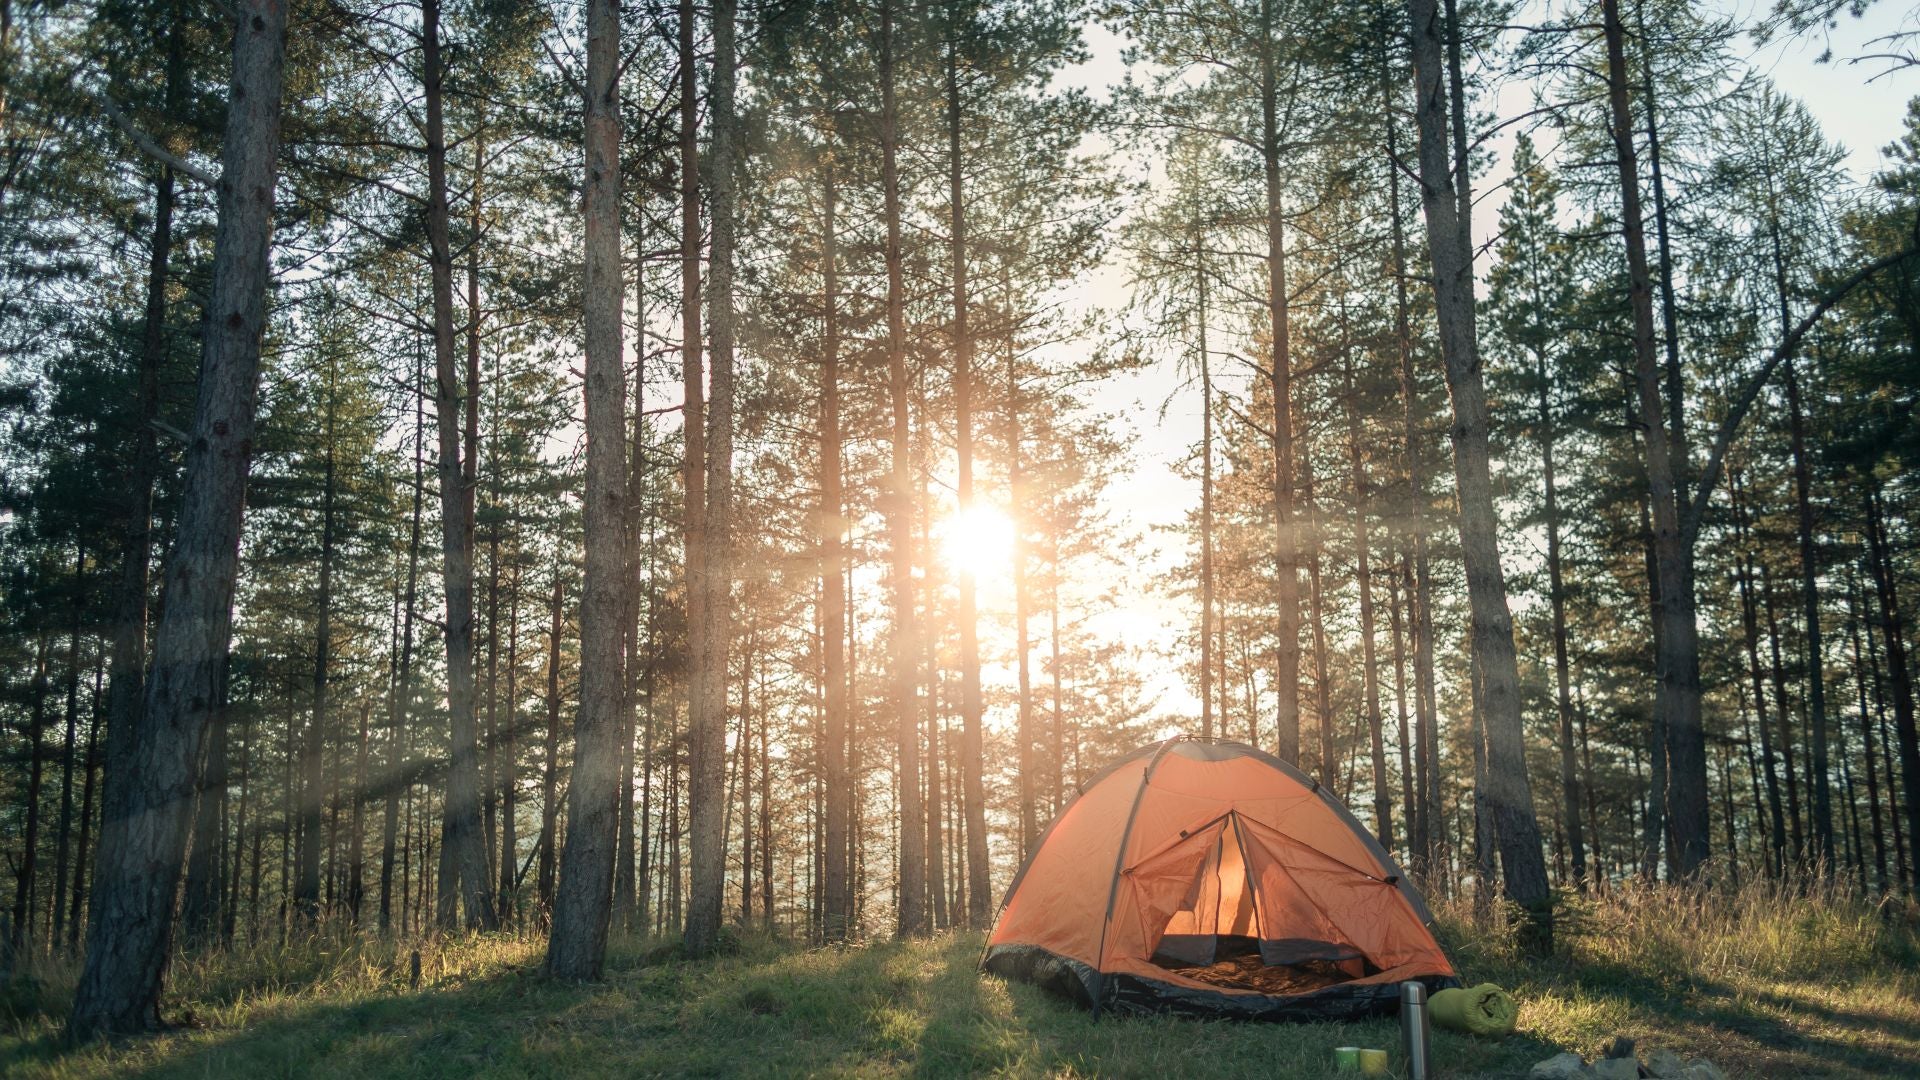 Tent in woods at sunset